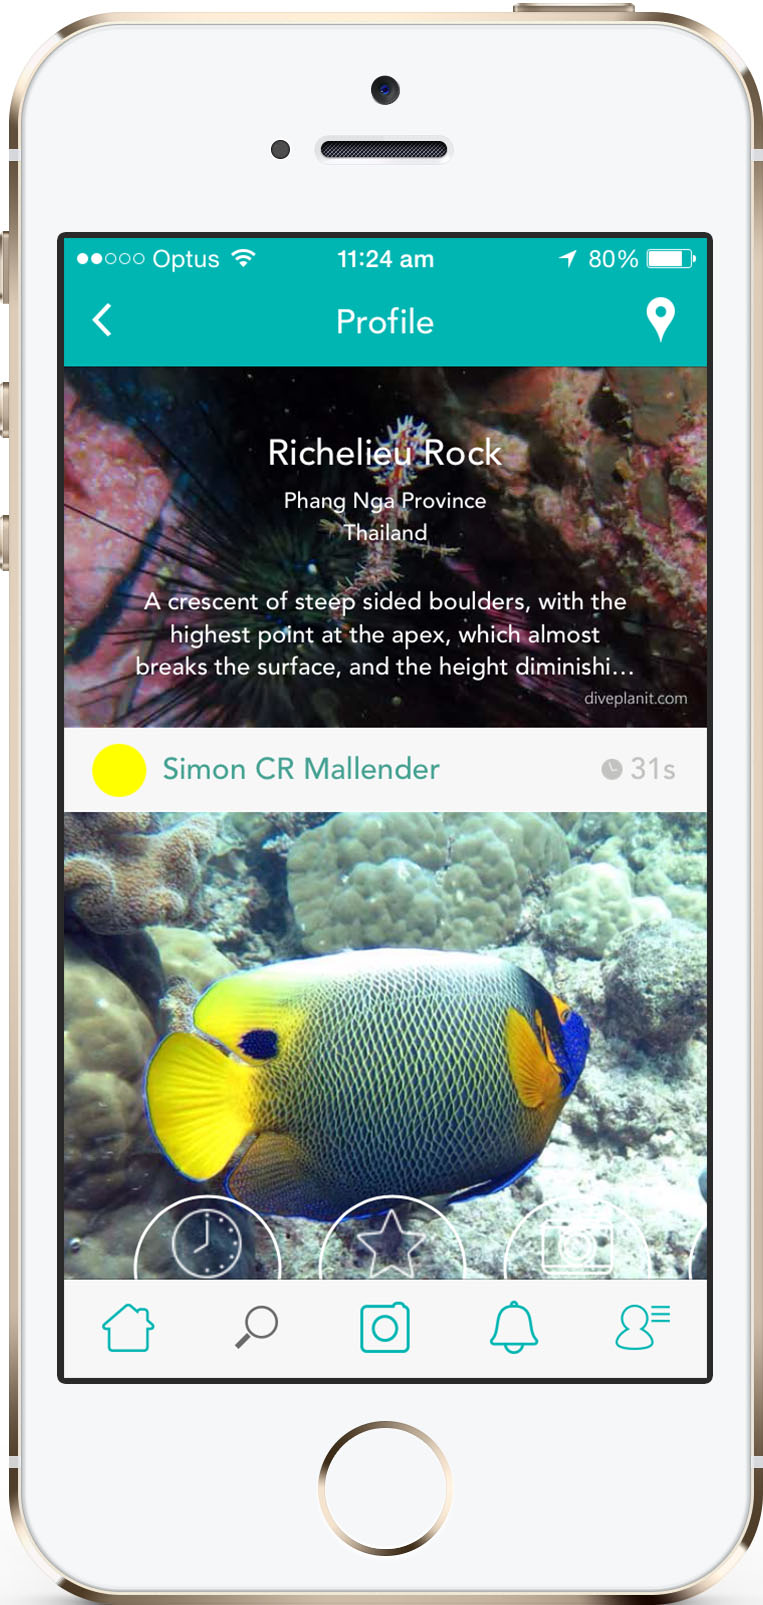 Diveplanit: a social media platform for divers. Log your dive with pictures & share to FB, Tw or the Scubafeed. Dive Sites, Centres and Fish ID pre-loaded